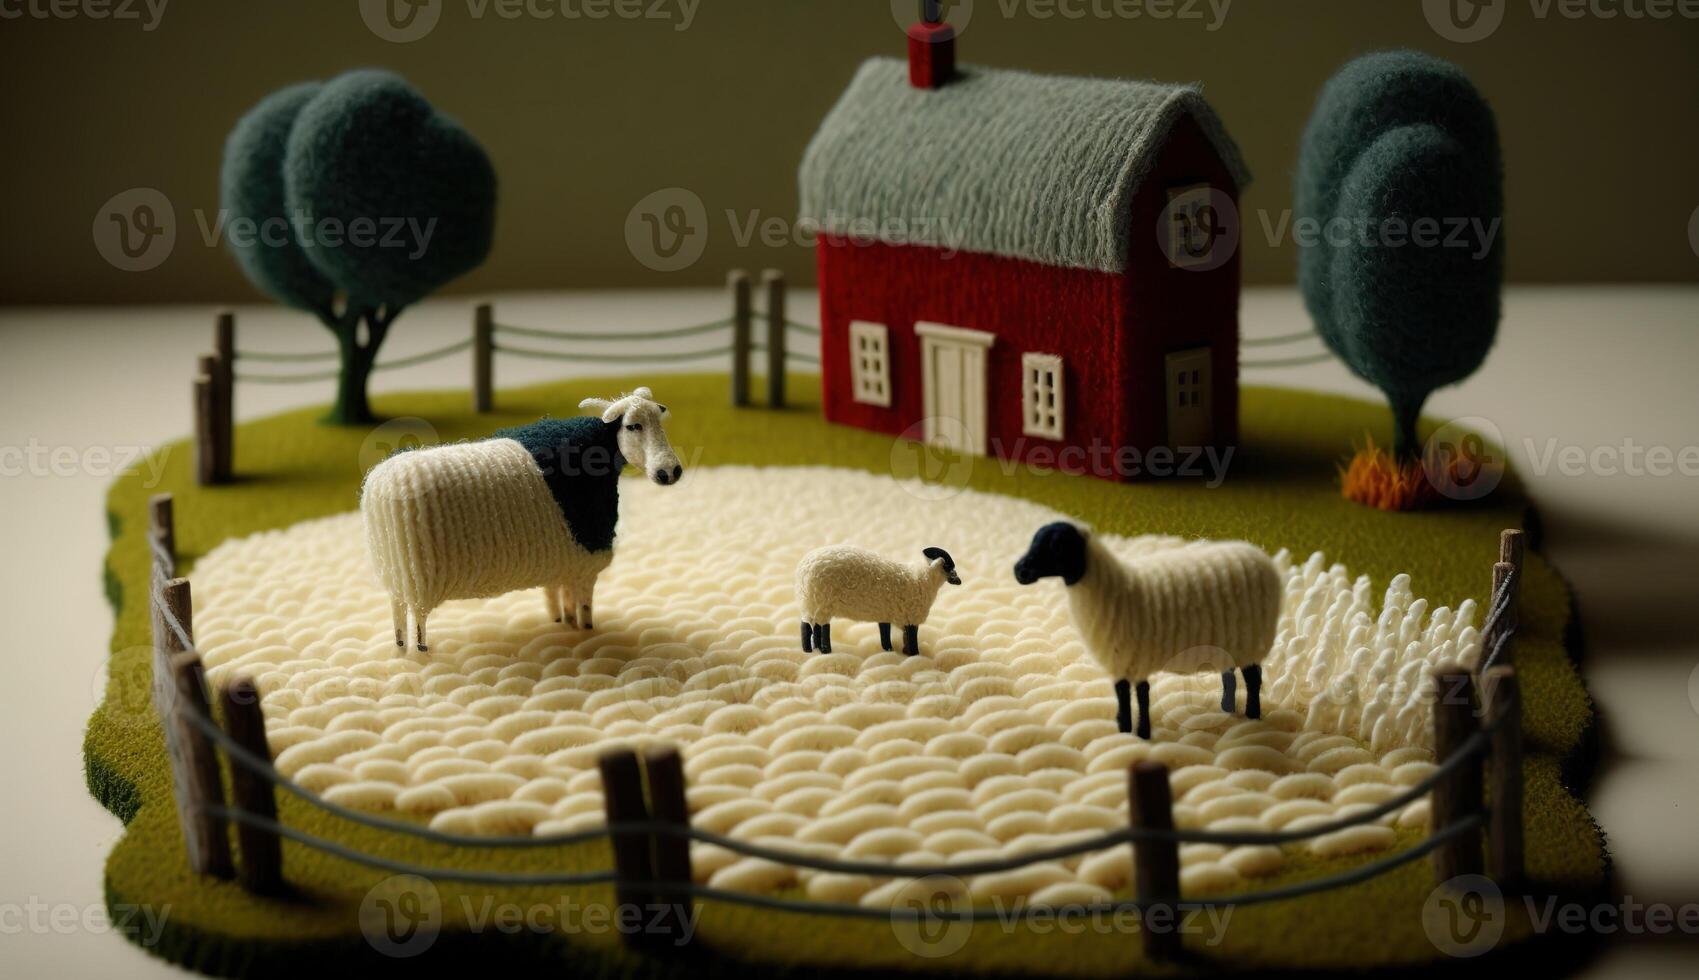 , cute farm landscape made of crochet with trees, river, green grass, farm animals. Dreamy agricultural scene made of wool materials, fabric, yarn, sewing for background photo